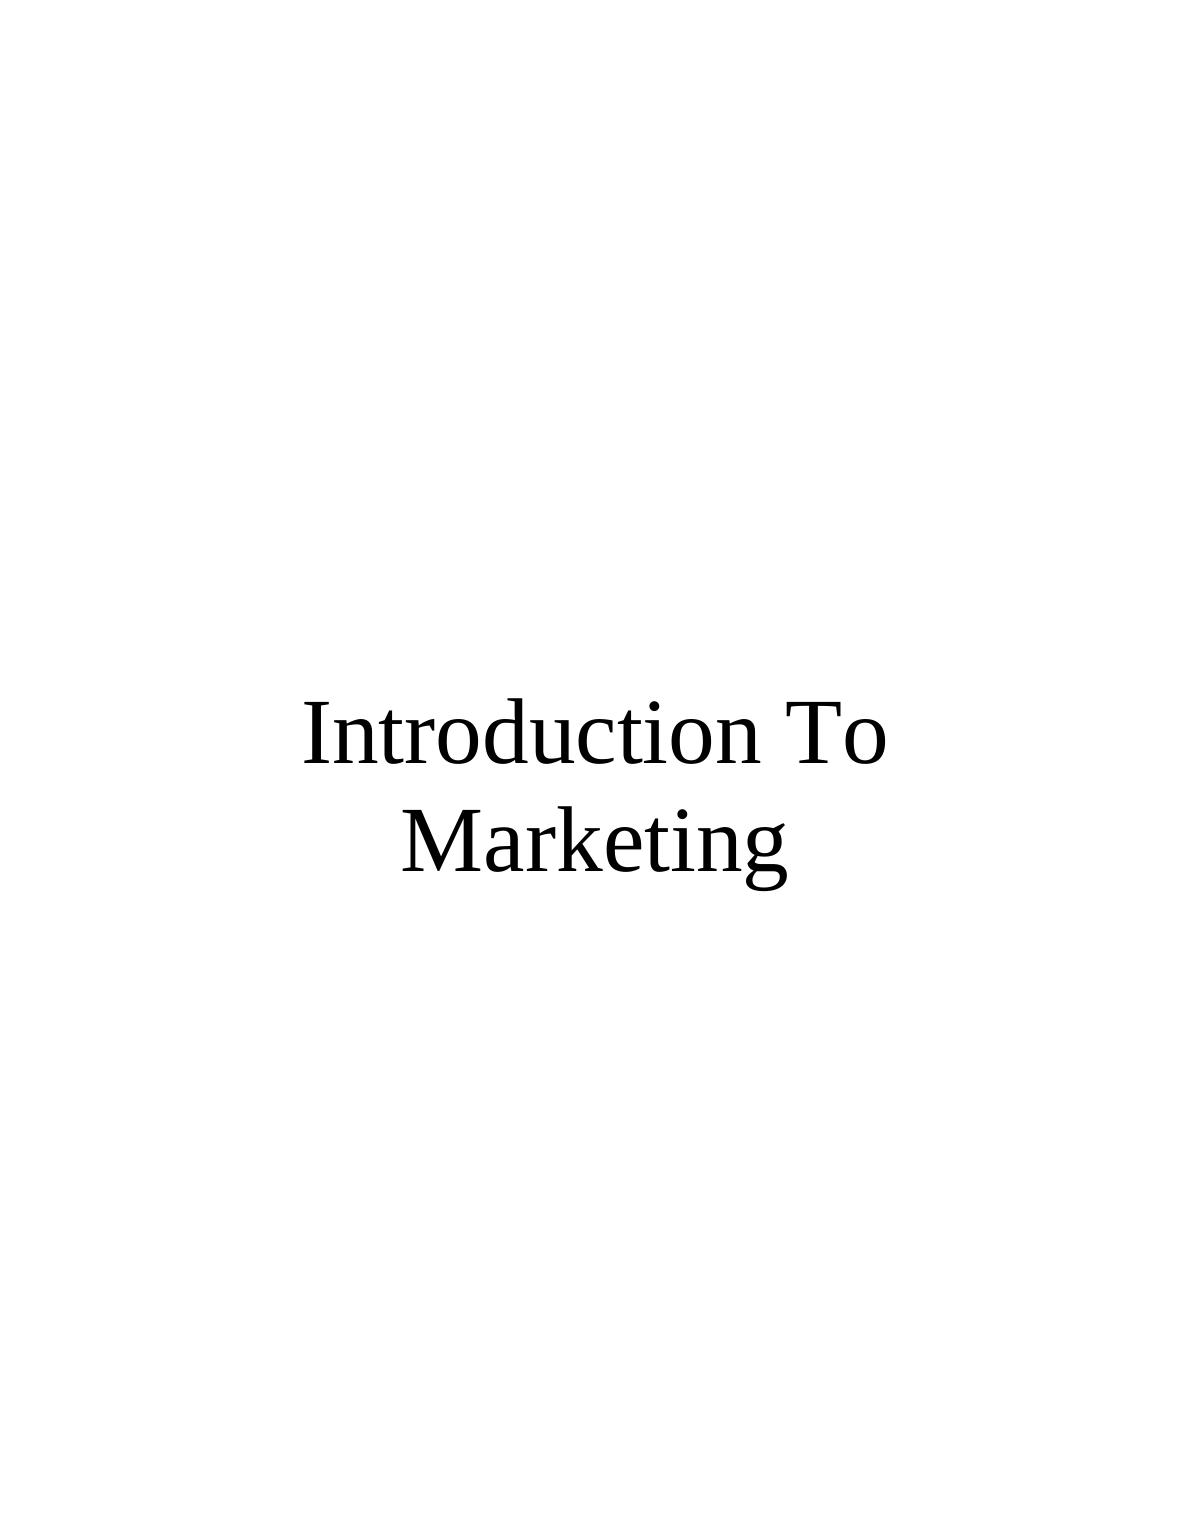 Introduction to Marketing Assignment | Costa Coffee_1